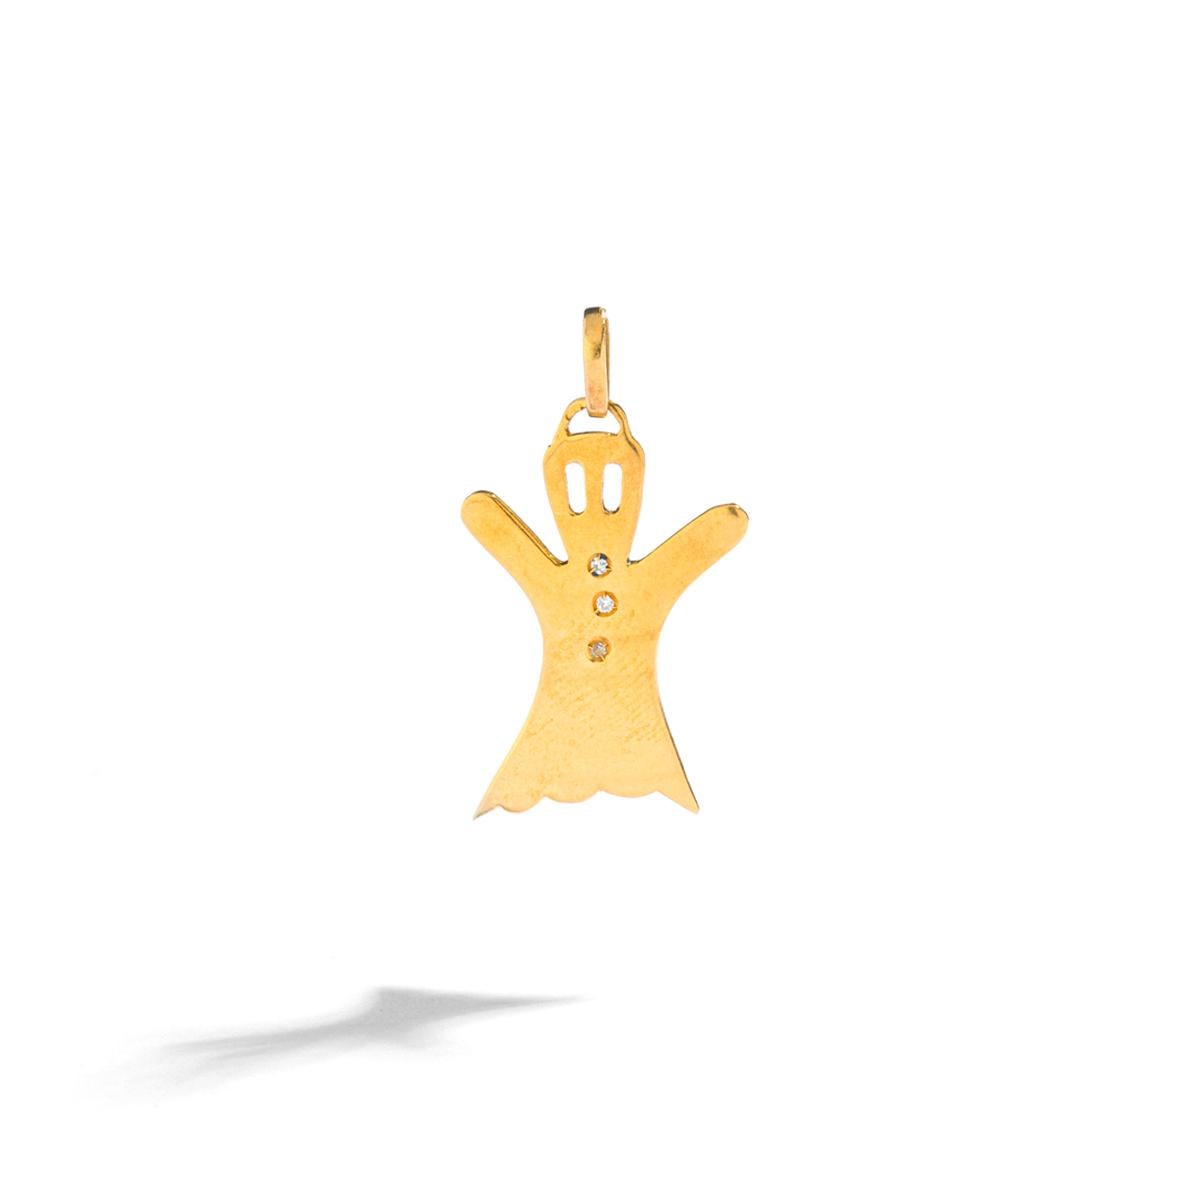 Ghost Yellow Gold 18k Pendant Charm.
Three small diamonds.
Circa 1990.

Total height: 1.34 inch (3.40 centimeters) including bail.
Total weight: 3.24 grams.